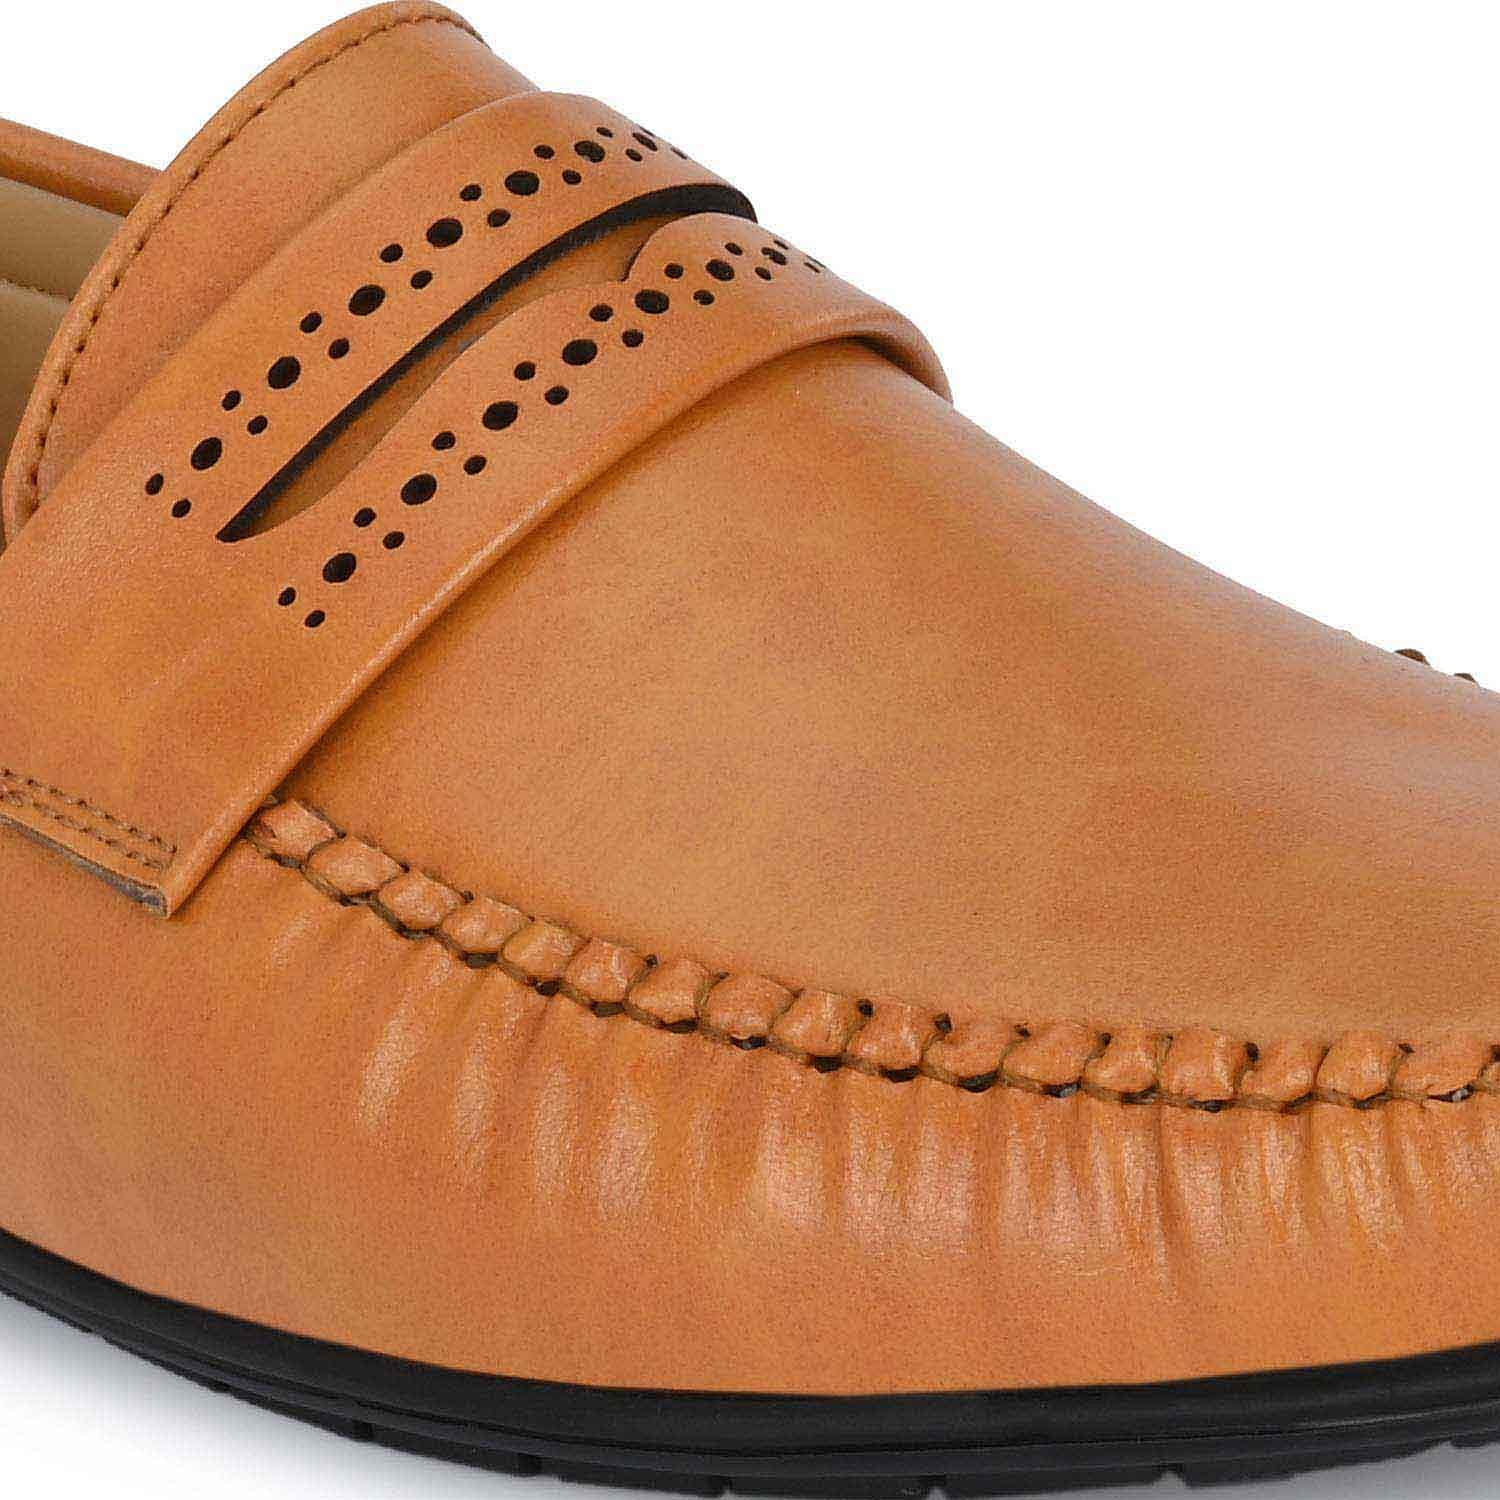 Pair-it Men's Loafers Shoes Tan - LZ-Loafer101